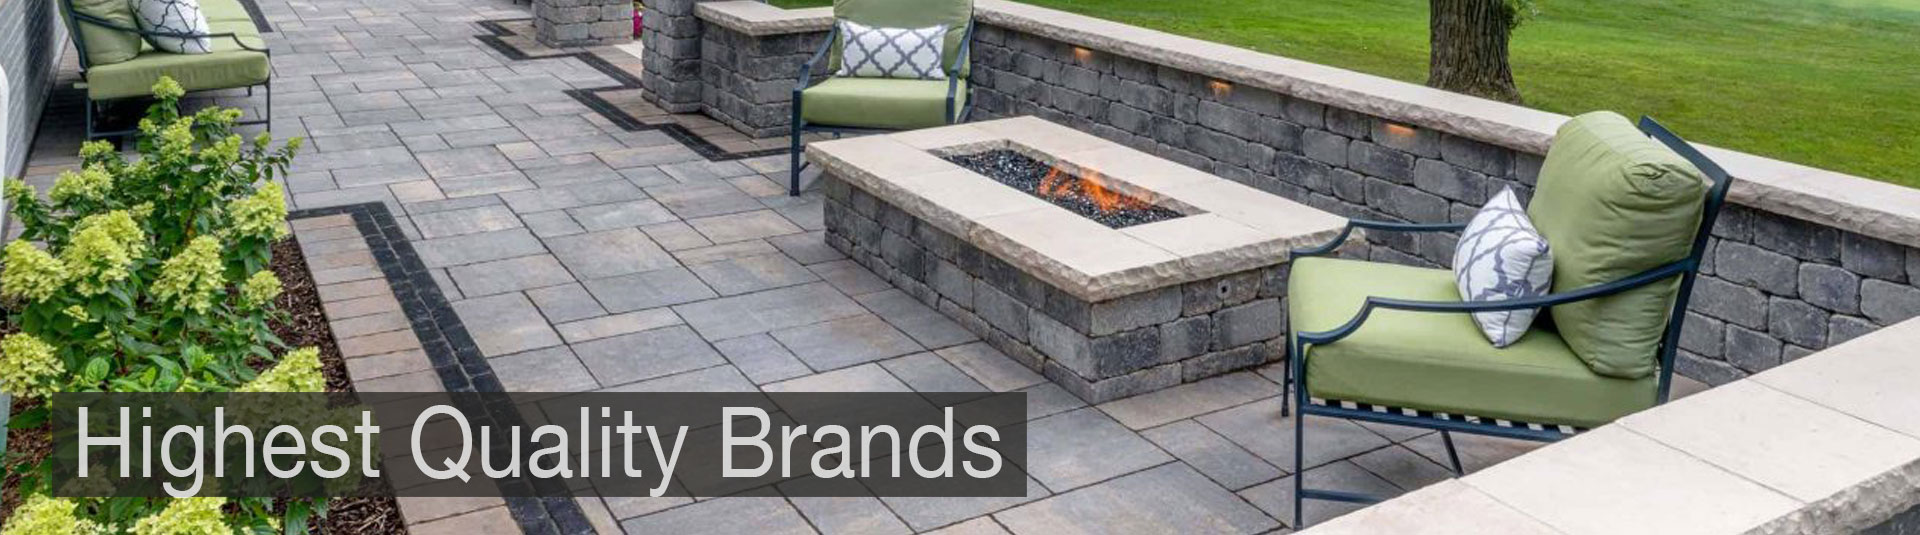 Benson Stone Company carries the highest quality brands of landscaping products for your home or business.